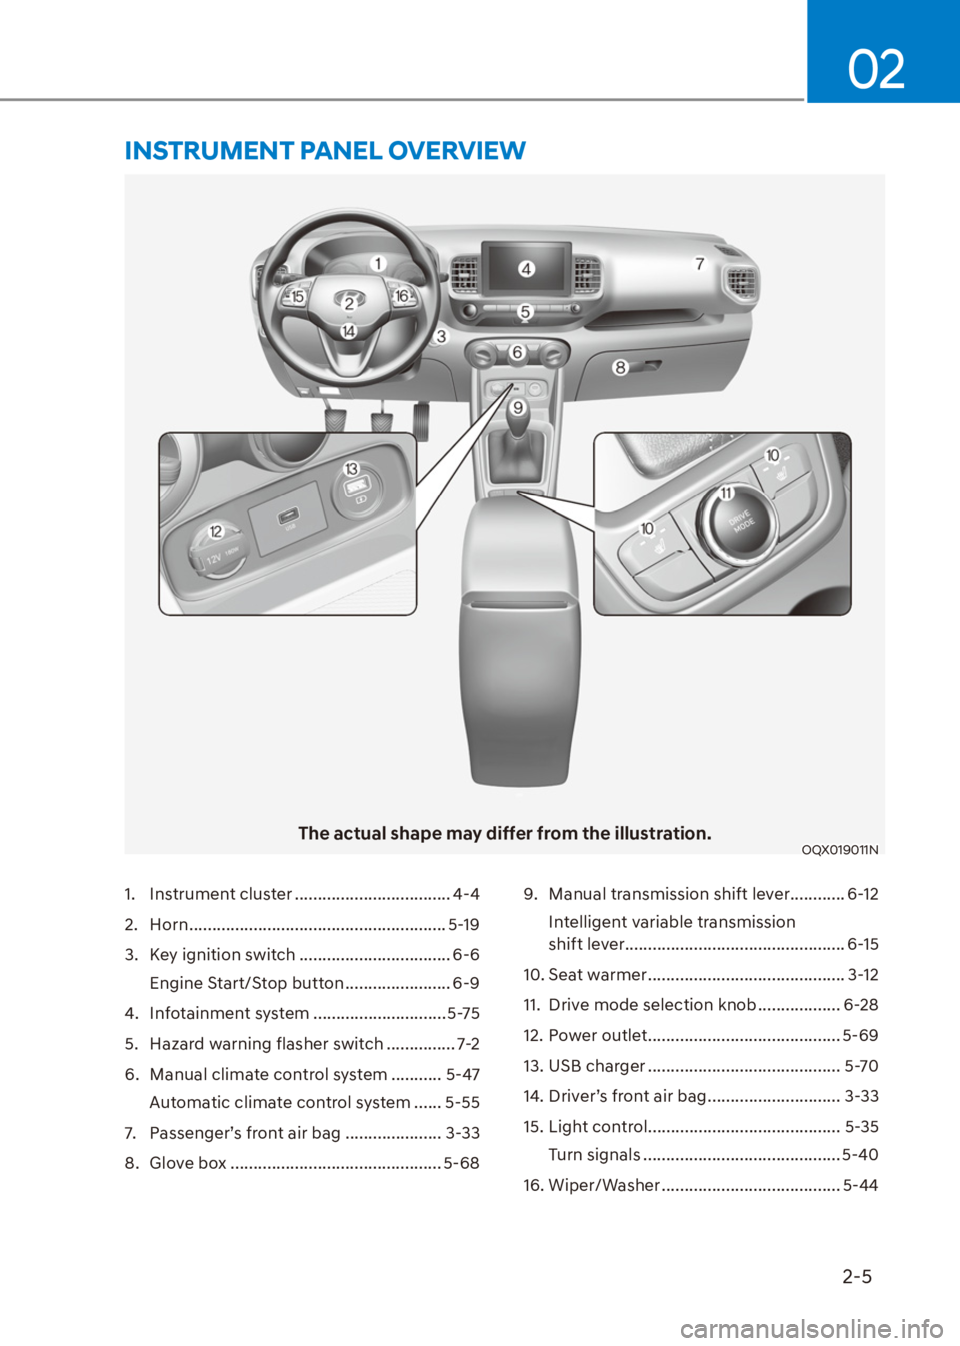 HYUNDAI VENUE 2022  Owners Manual 2-5
02
The actual shape may differ from the illustration.OQX019011N 
1. Instrument cluster .................................. 4-4
2. Horn ........................................................ 5-19
